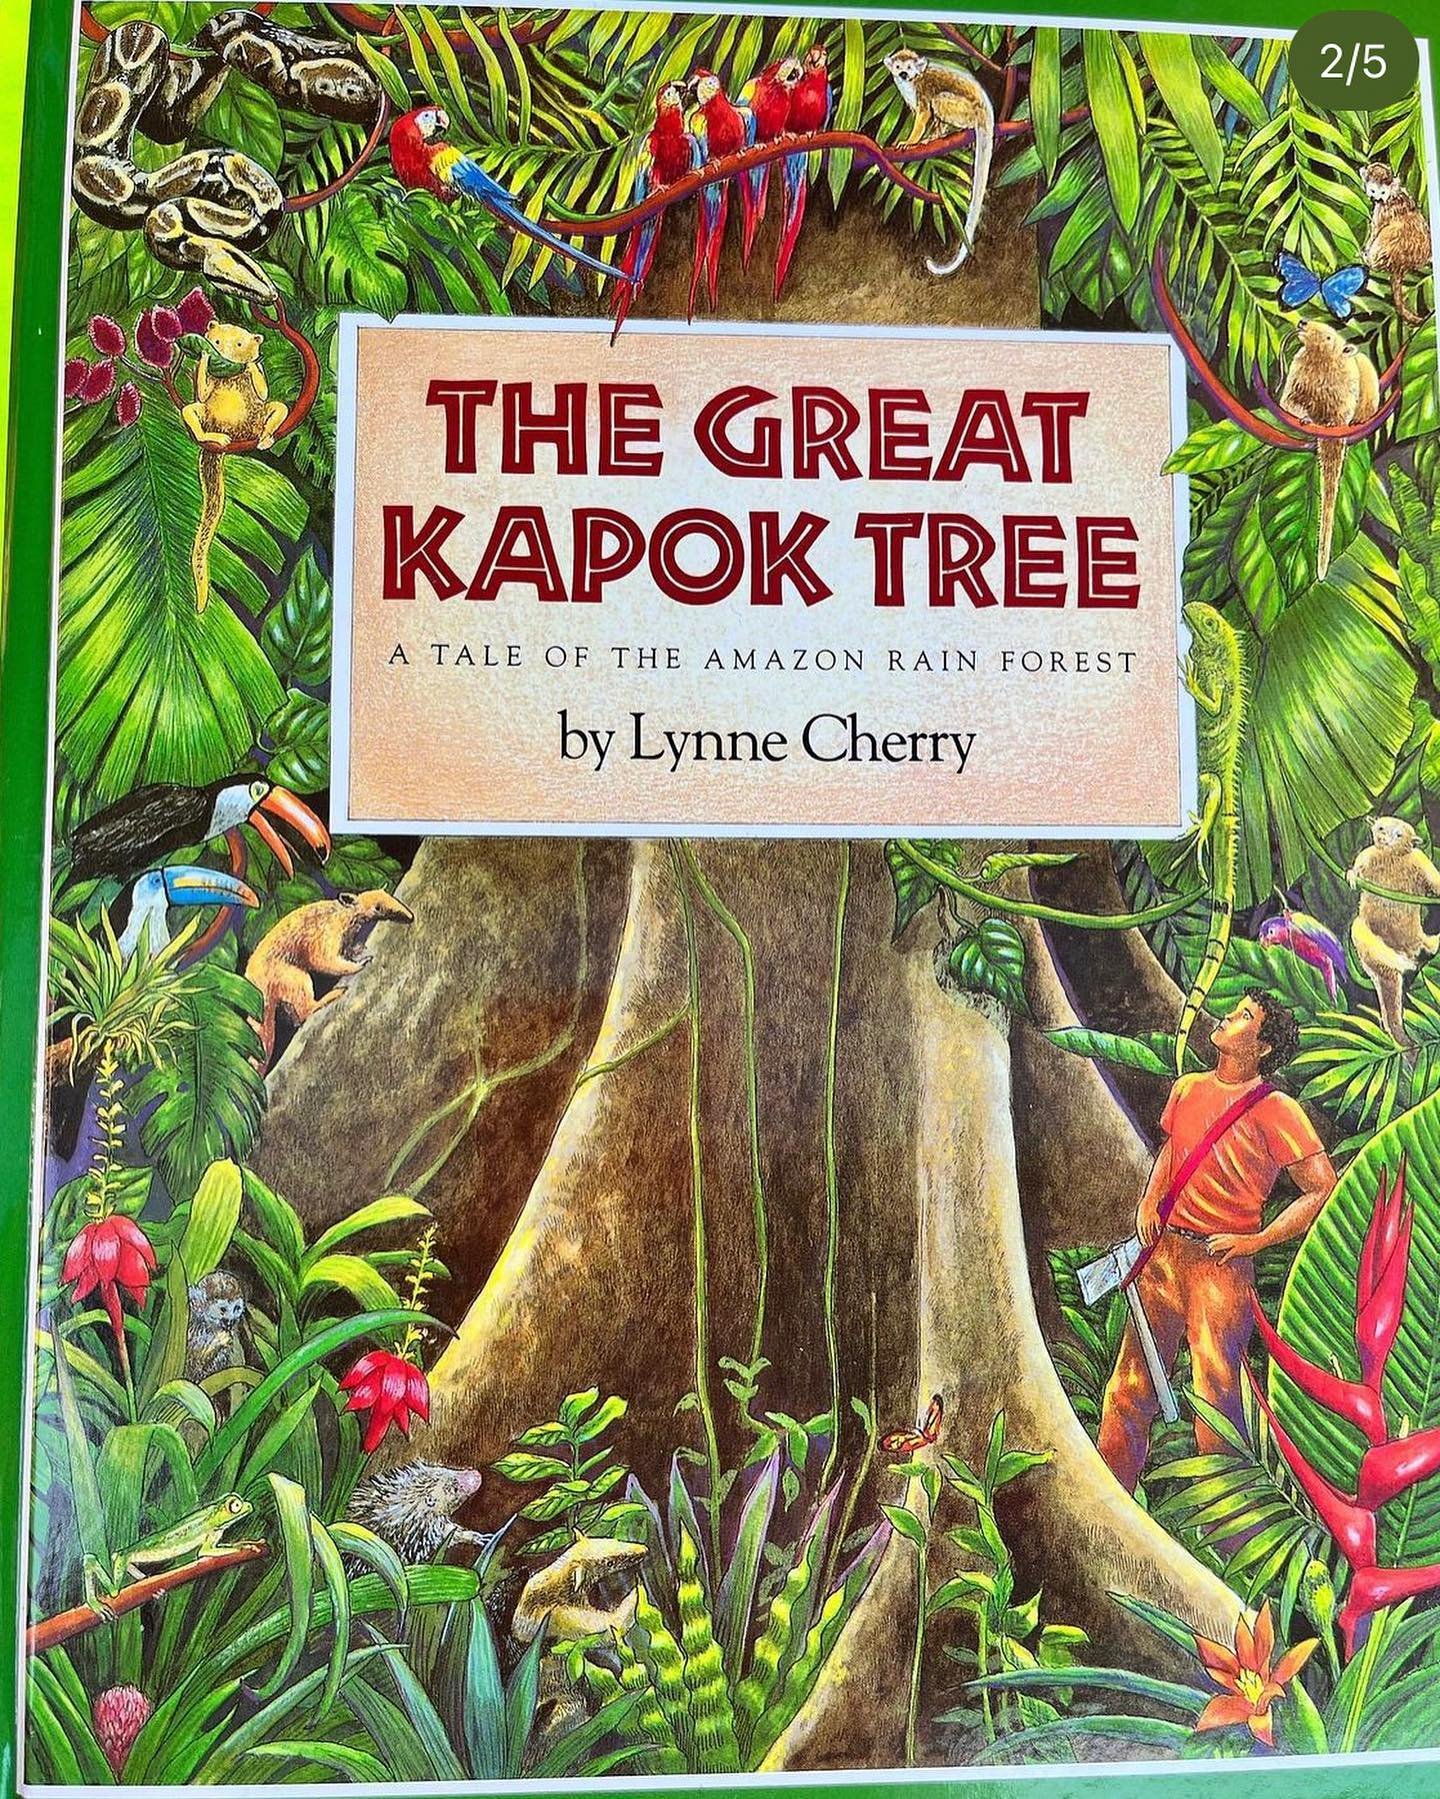 Today the theme was plants and growth. Lynne Cherry, author and illustrator of The Great Kapok Tree was our inspiration. And to mark Earth Day we tuned into some nature sounds while we created a jungle scene.